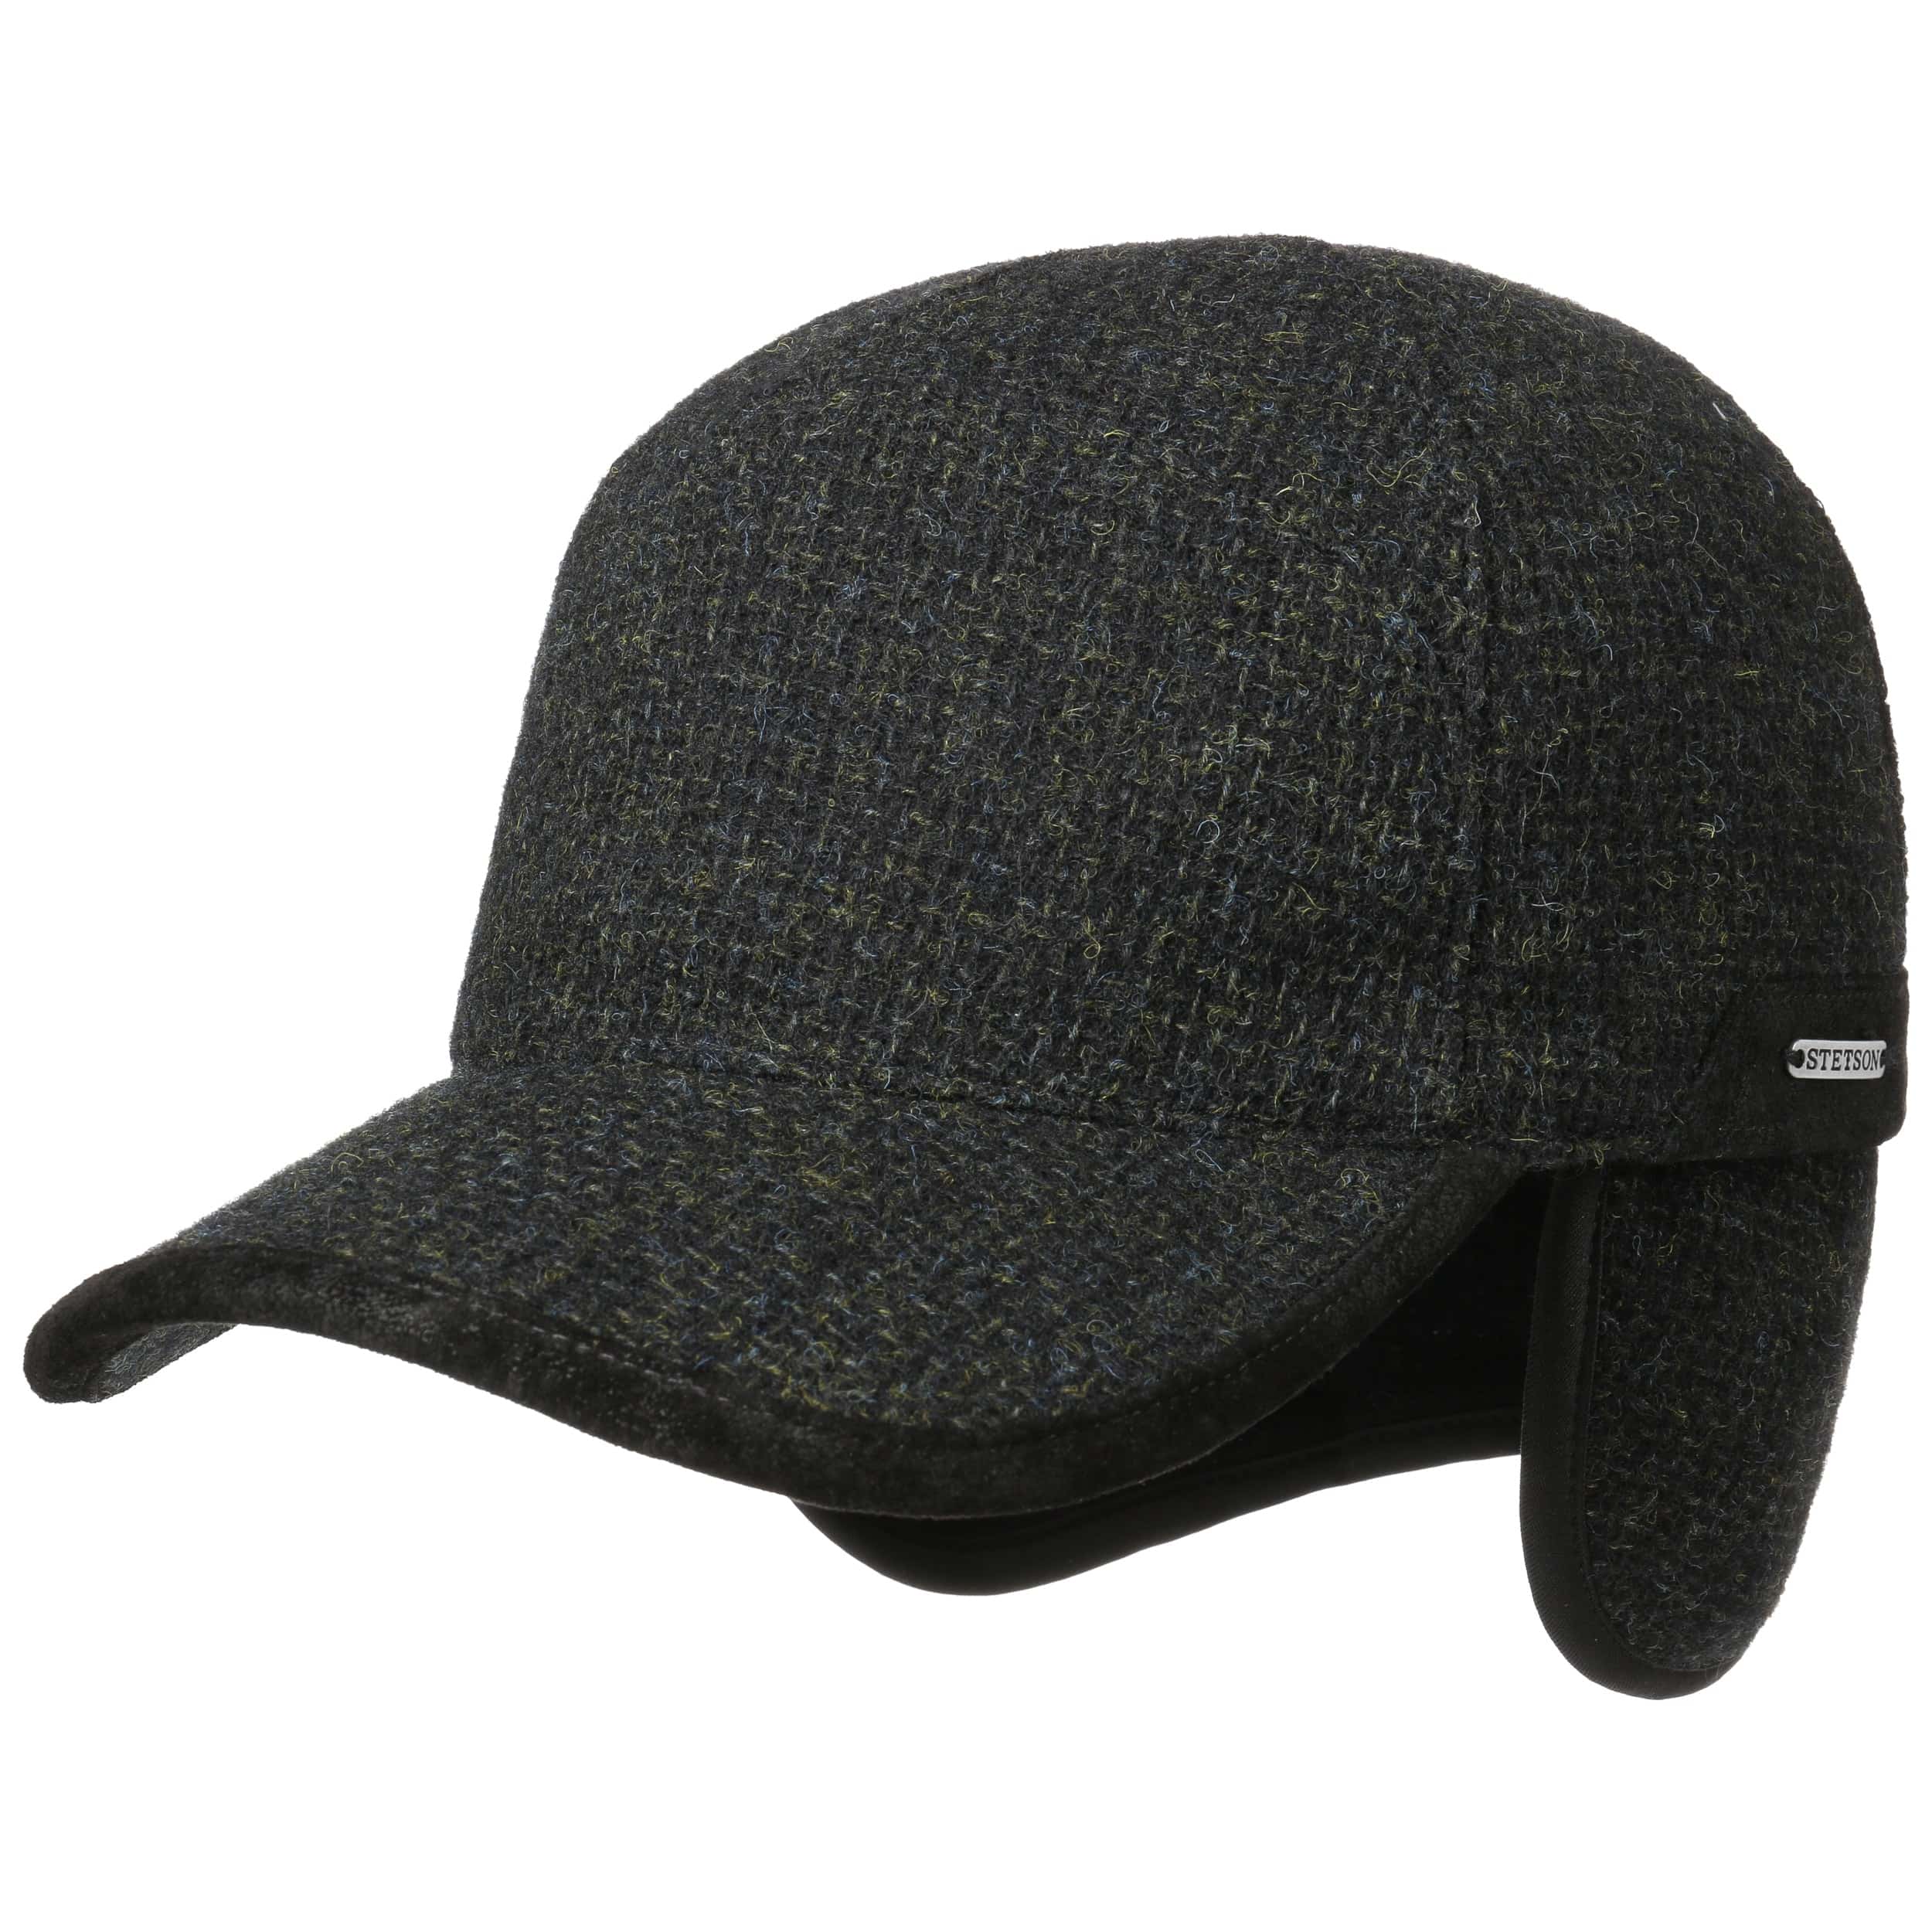 Daysville Wool Cap with Ear Flaps by Stetson - 79,00